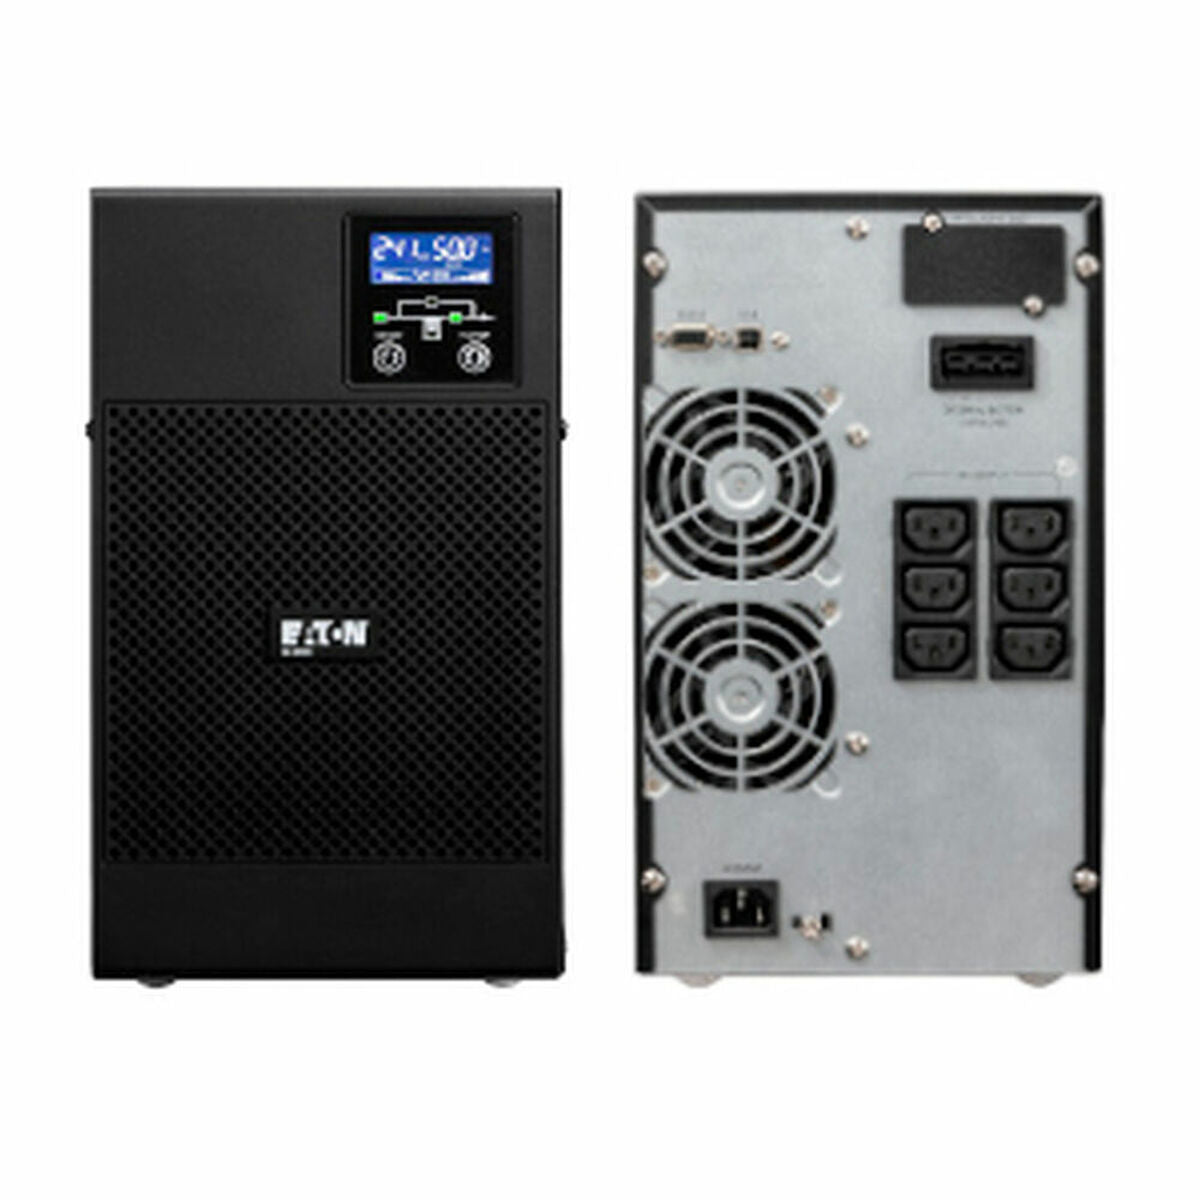 Uninterruptible Power Supply System Interactive UPS Eaton 9E2000I, Eaton, Computing, Accessories, uninterruptible-power-supply-system-interactive-ups-eaton-9e2000i, Brand_Eaton, category-reference-2609, category-reference-2642, category-reference-2845, category-reference-t-19685, category-reference-t-19908, category-reference-t-21341, computers / peripherals, Condition_NEW, office, Price_800 - 900, Teleworking, RiotNook